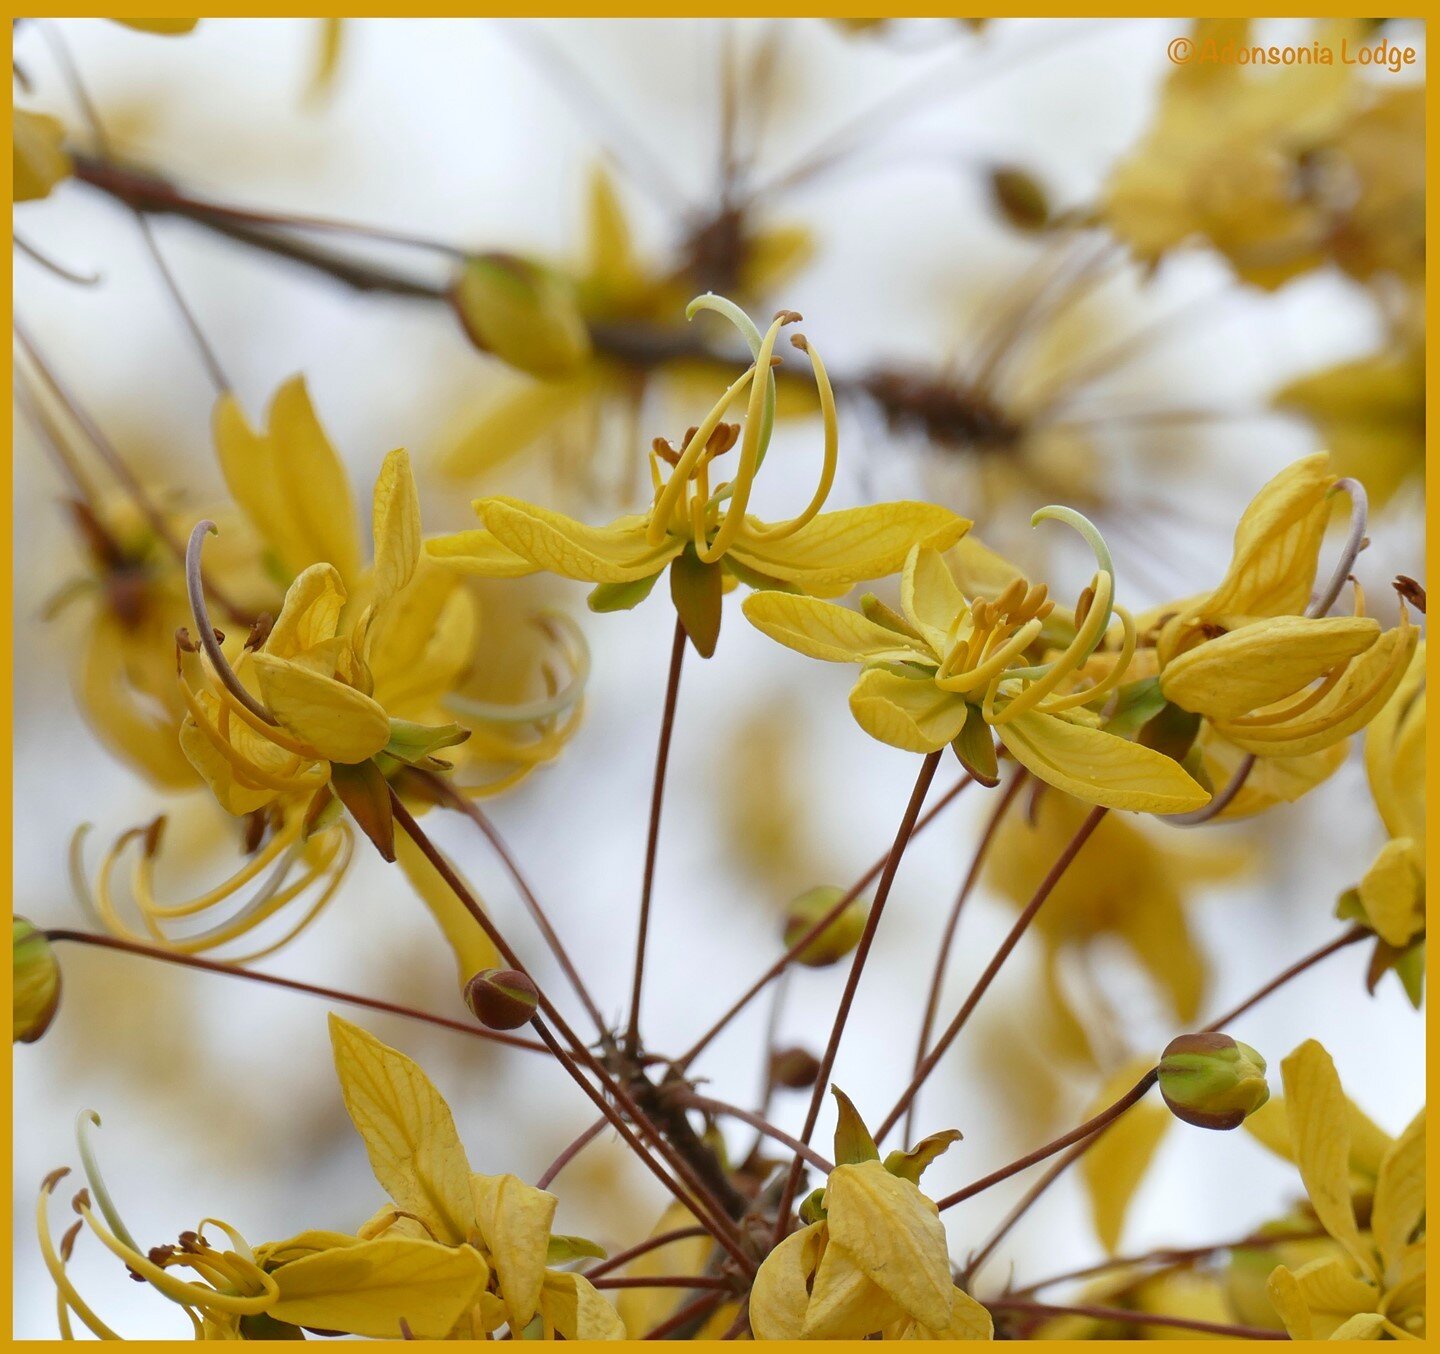 In the harsh African bushveld climate not many plants use their precious resources to produce showy flowers so these bright yellow flowers really stand out.

#spring #voorjaar #southafrica #zuidafrika #suedafrika  #bushveld #lowveld #flora #grietjie_